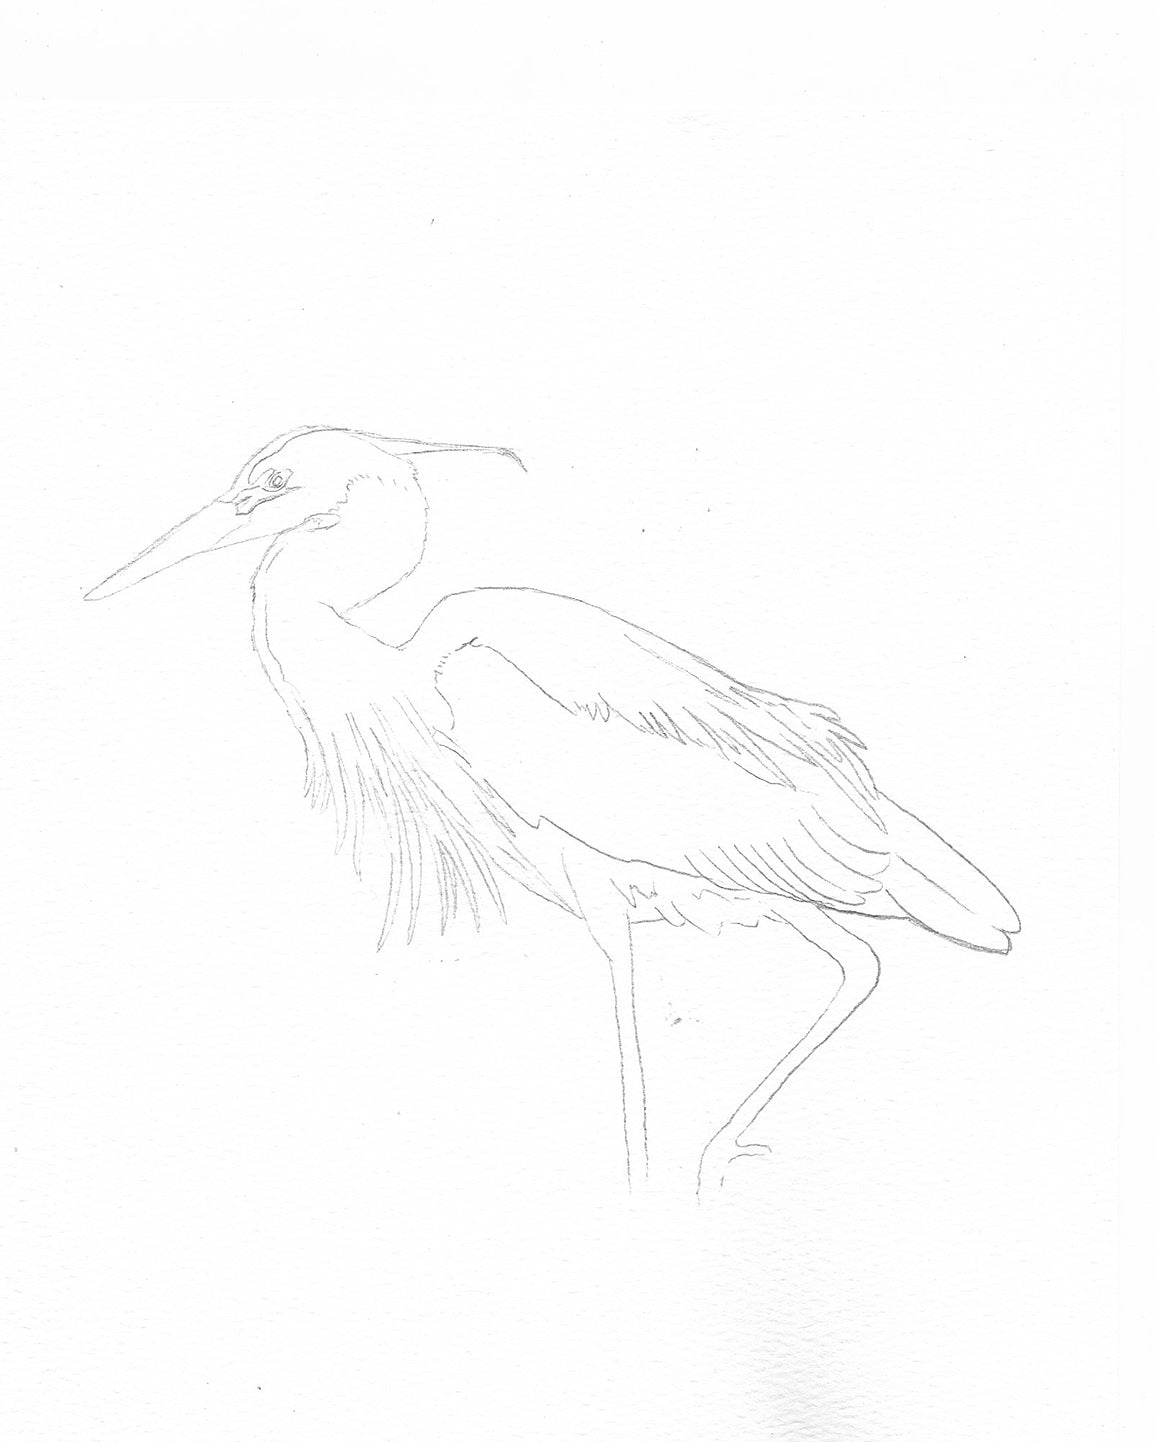 Watercolor Class - Step by Step - Paint Your Own Great Blue Heron - May 4th, 4-7p